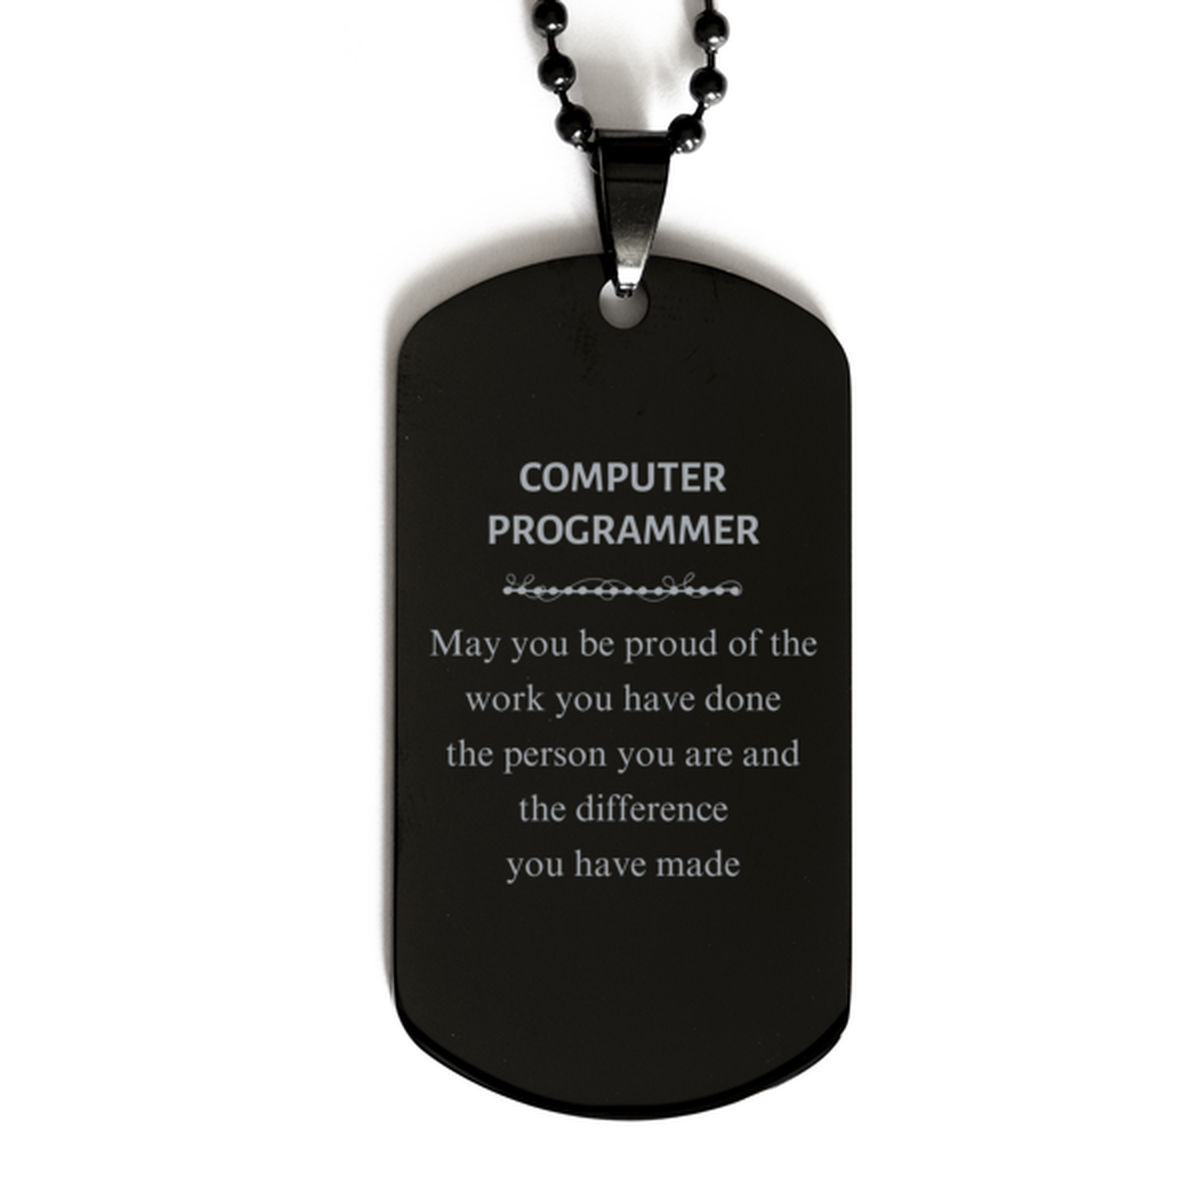 Computer Programmer May you be proud of the work you have done, Retirement Computer Programmer Black Dog Tag for Colleague Appreciation Gifts Amazing for Computer Programmer